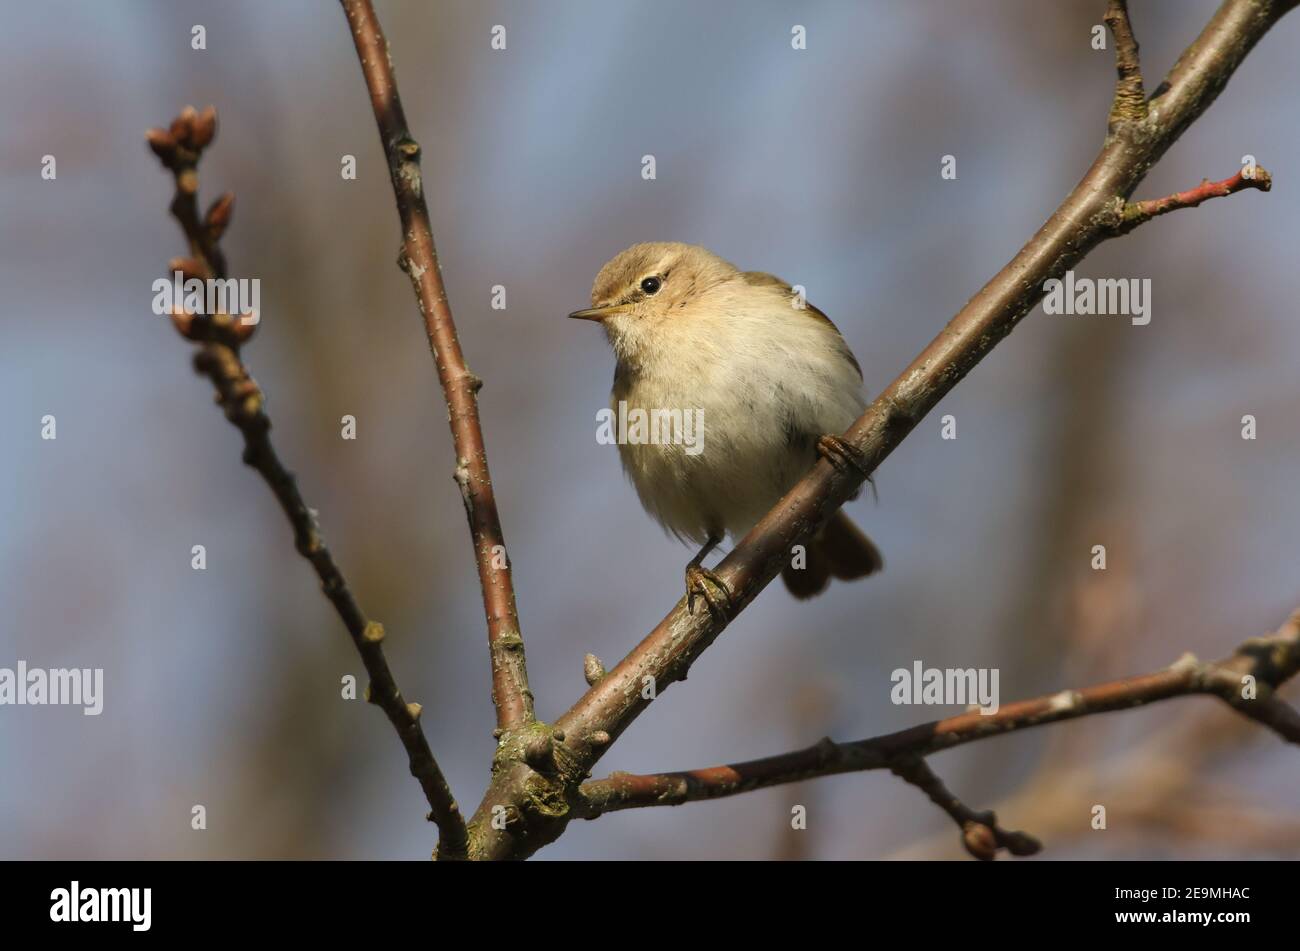 A Siberian Chiffchaff, Phylloscopus collybita tristis, perched on a branch of a tree in winter. Stock Photo